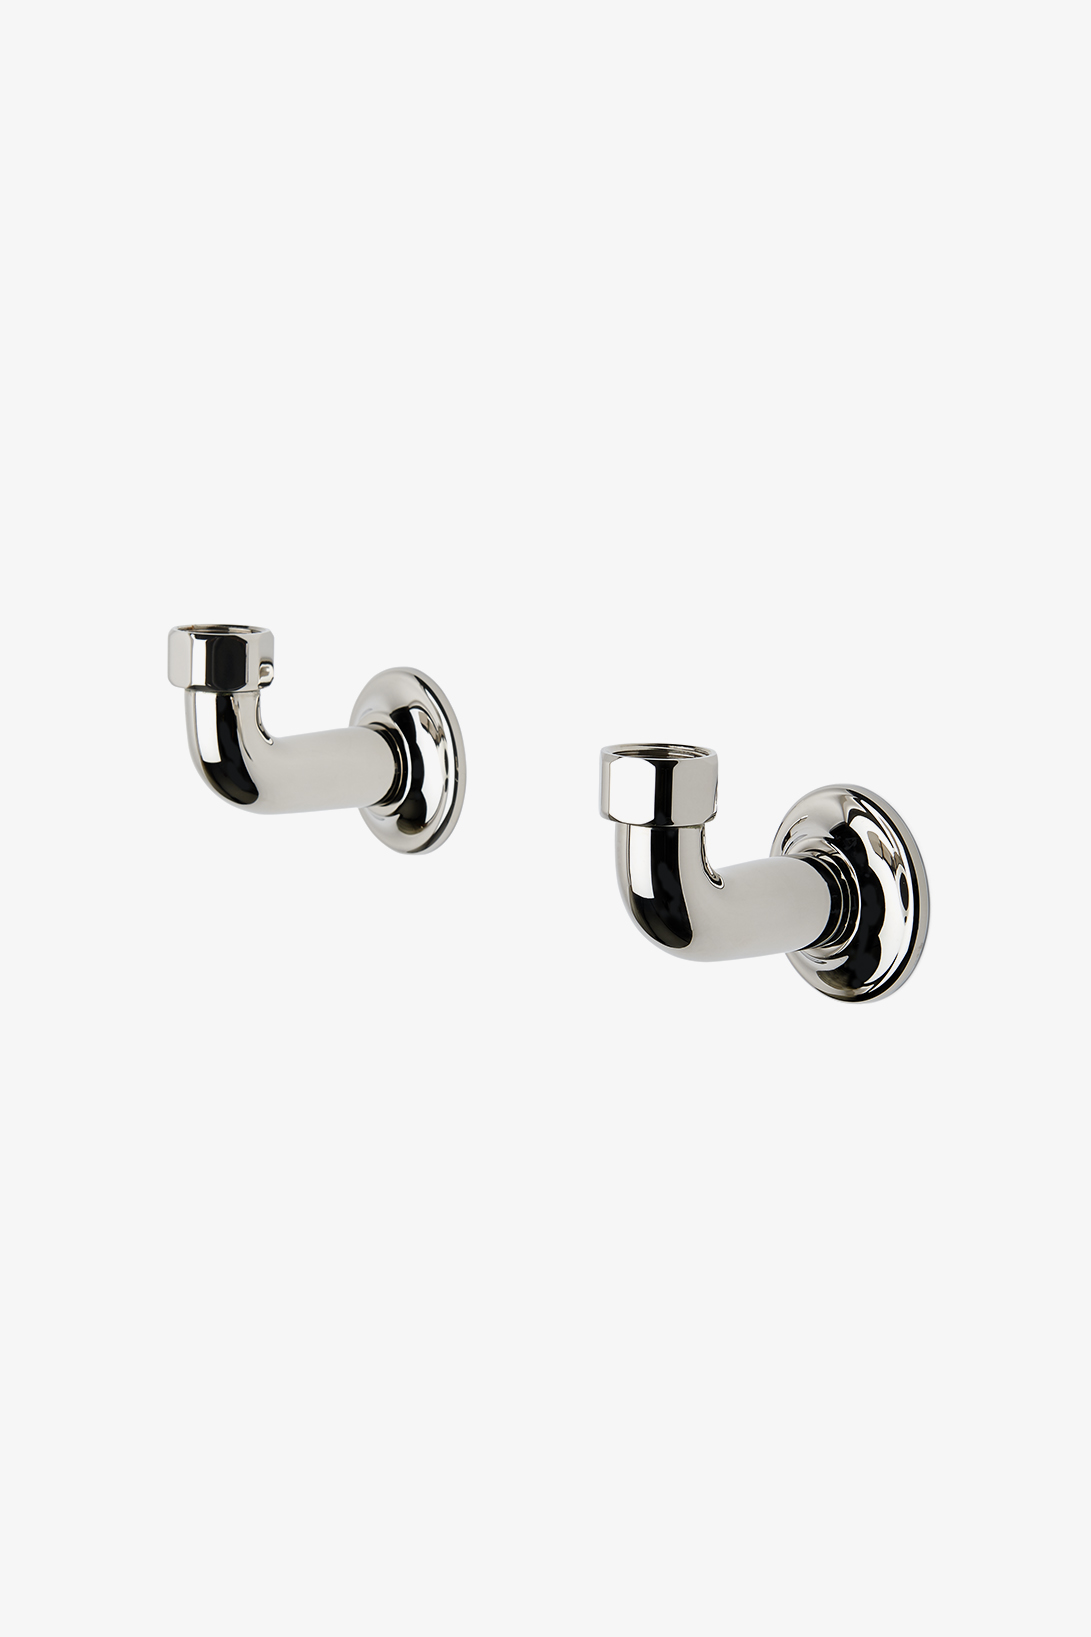 Easton Pair Wall Unions Kitchen Faucets